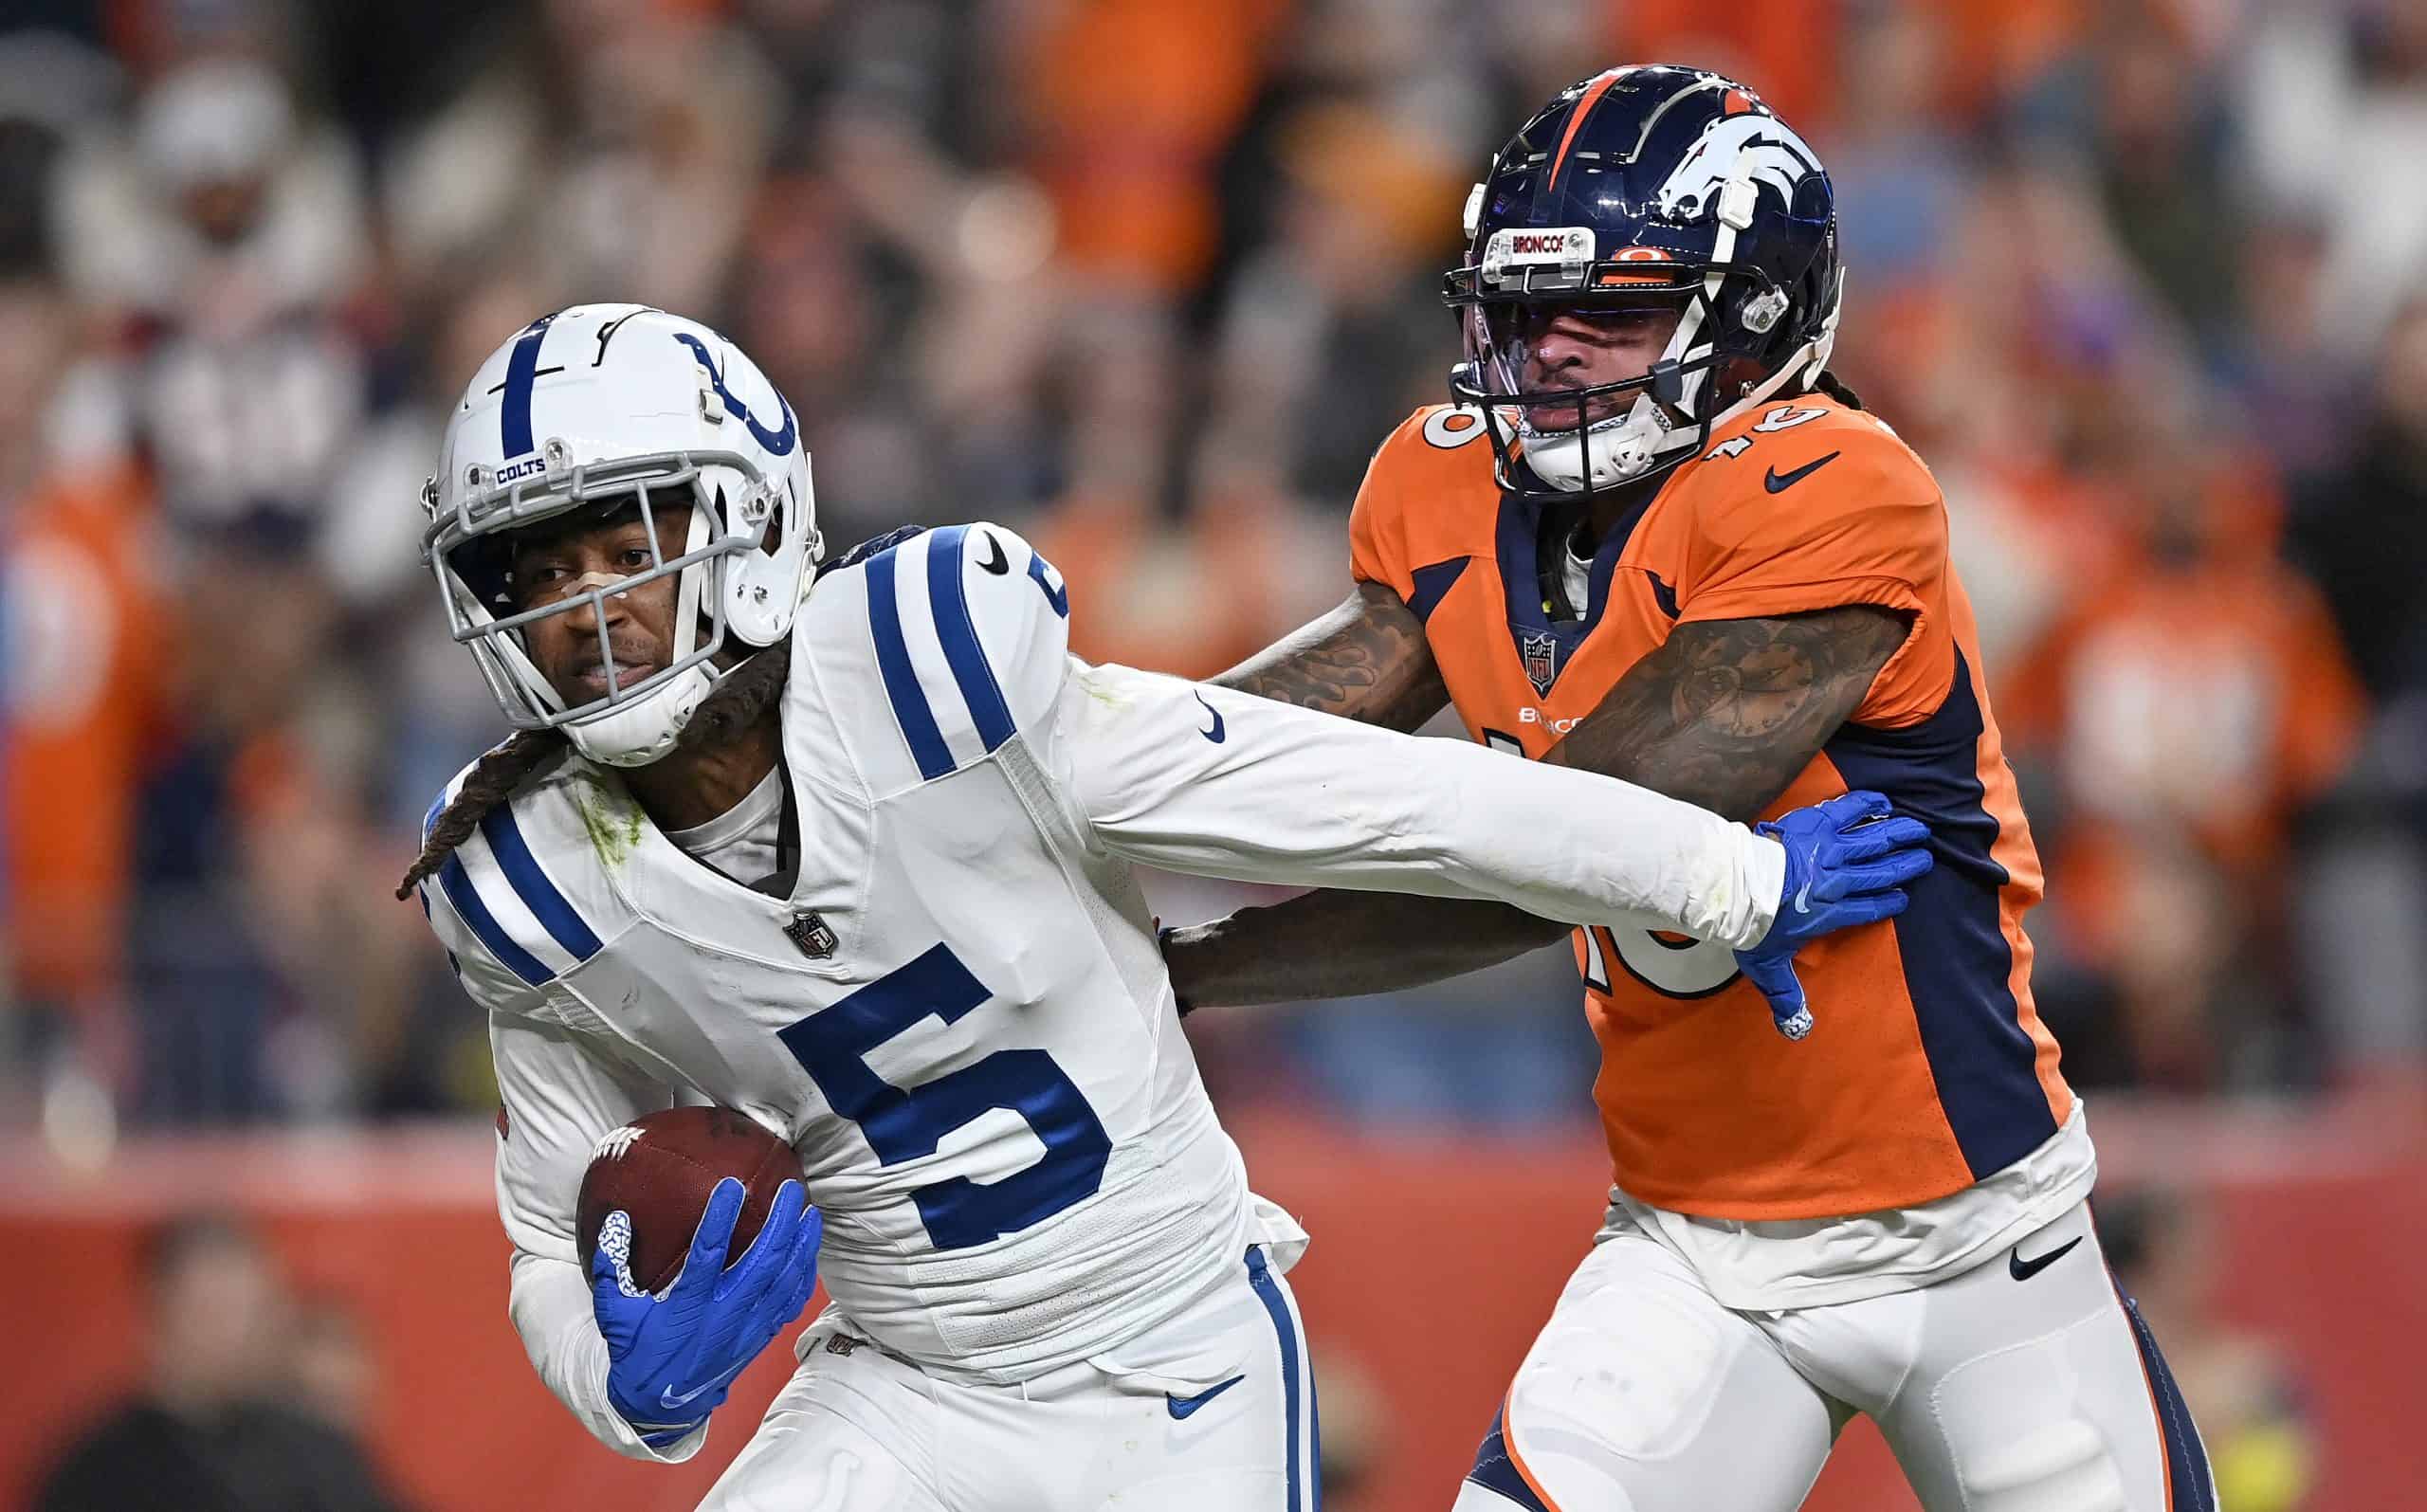 Highlights and Best Moments: Colts 12-9 Broncos in NFL